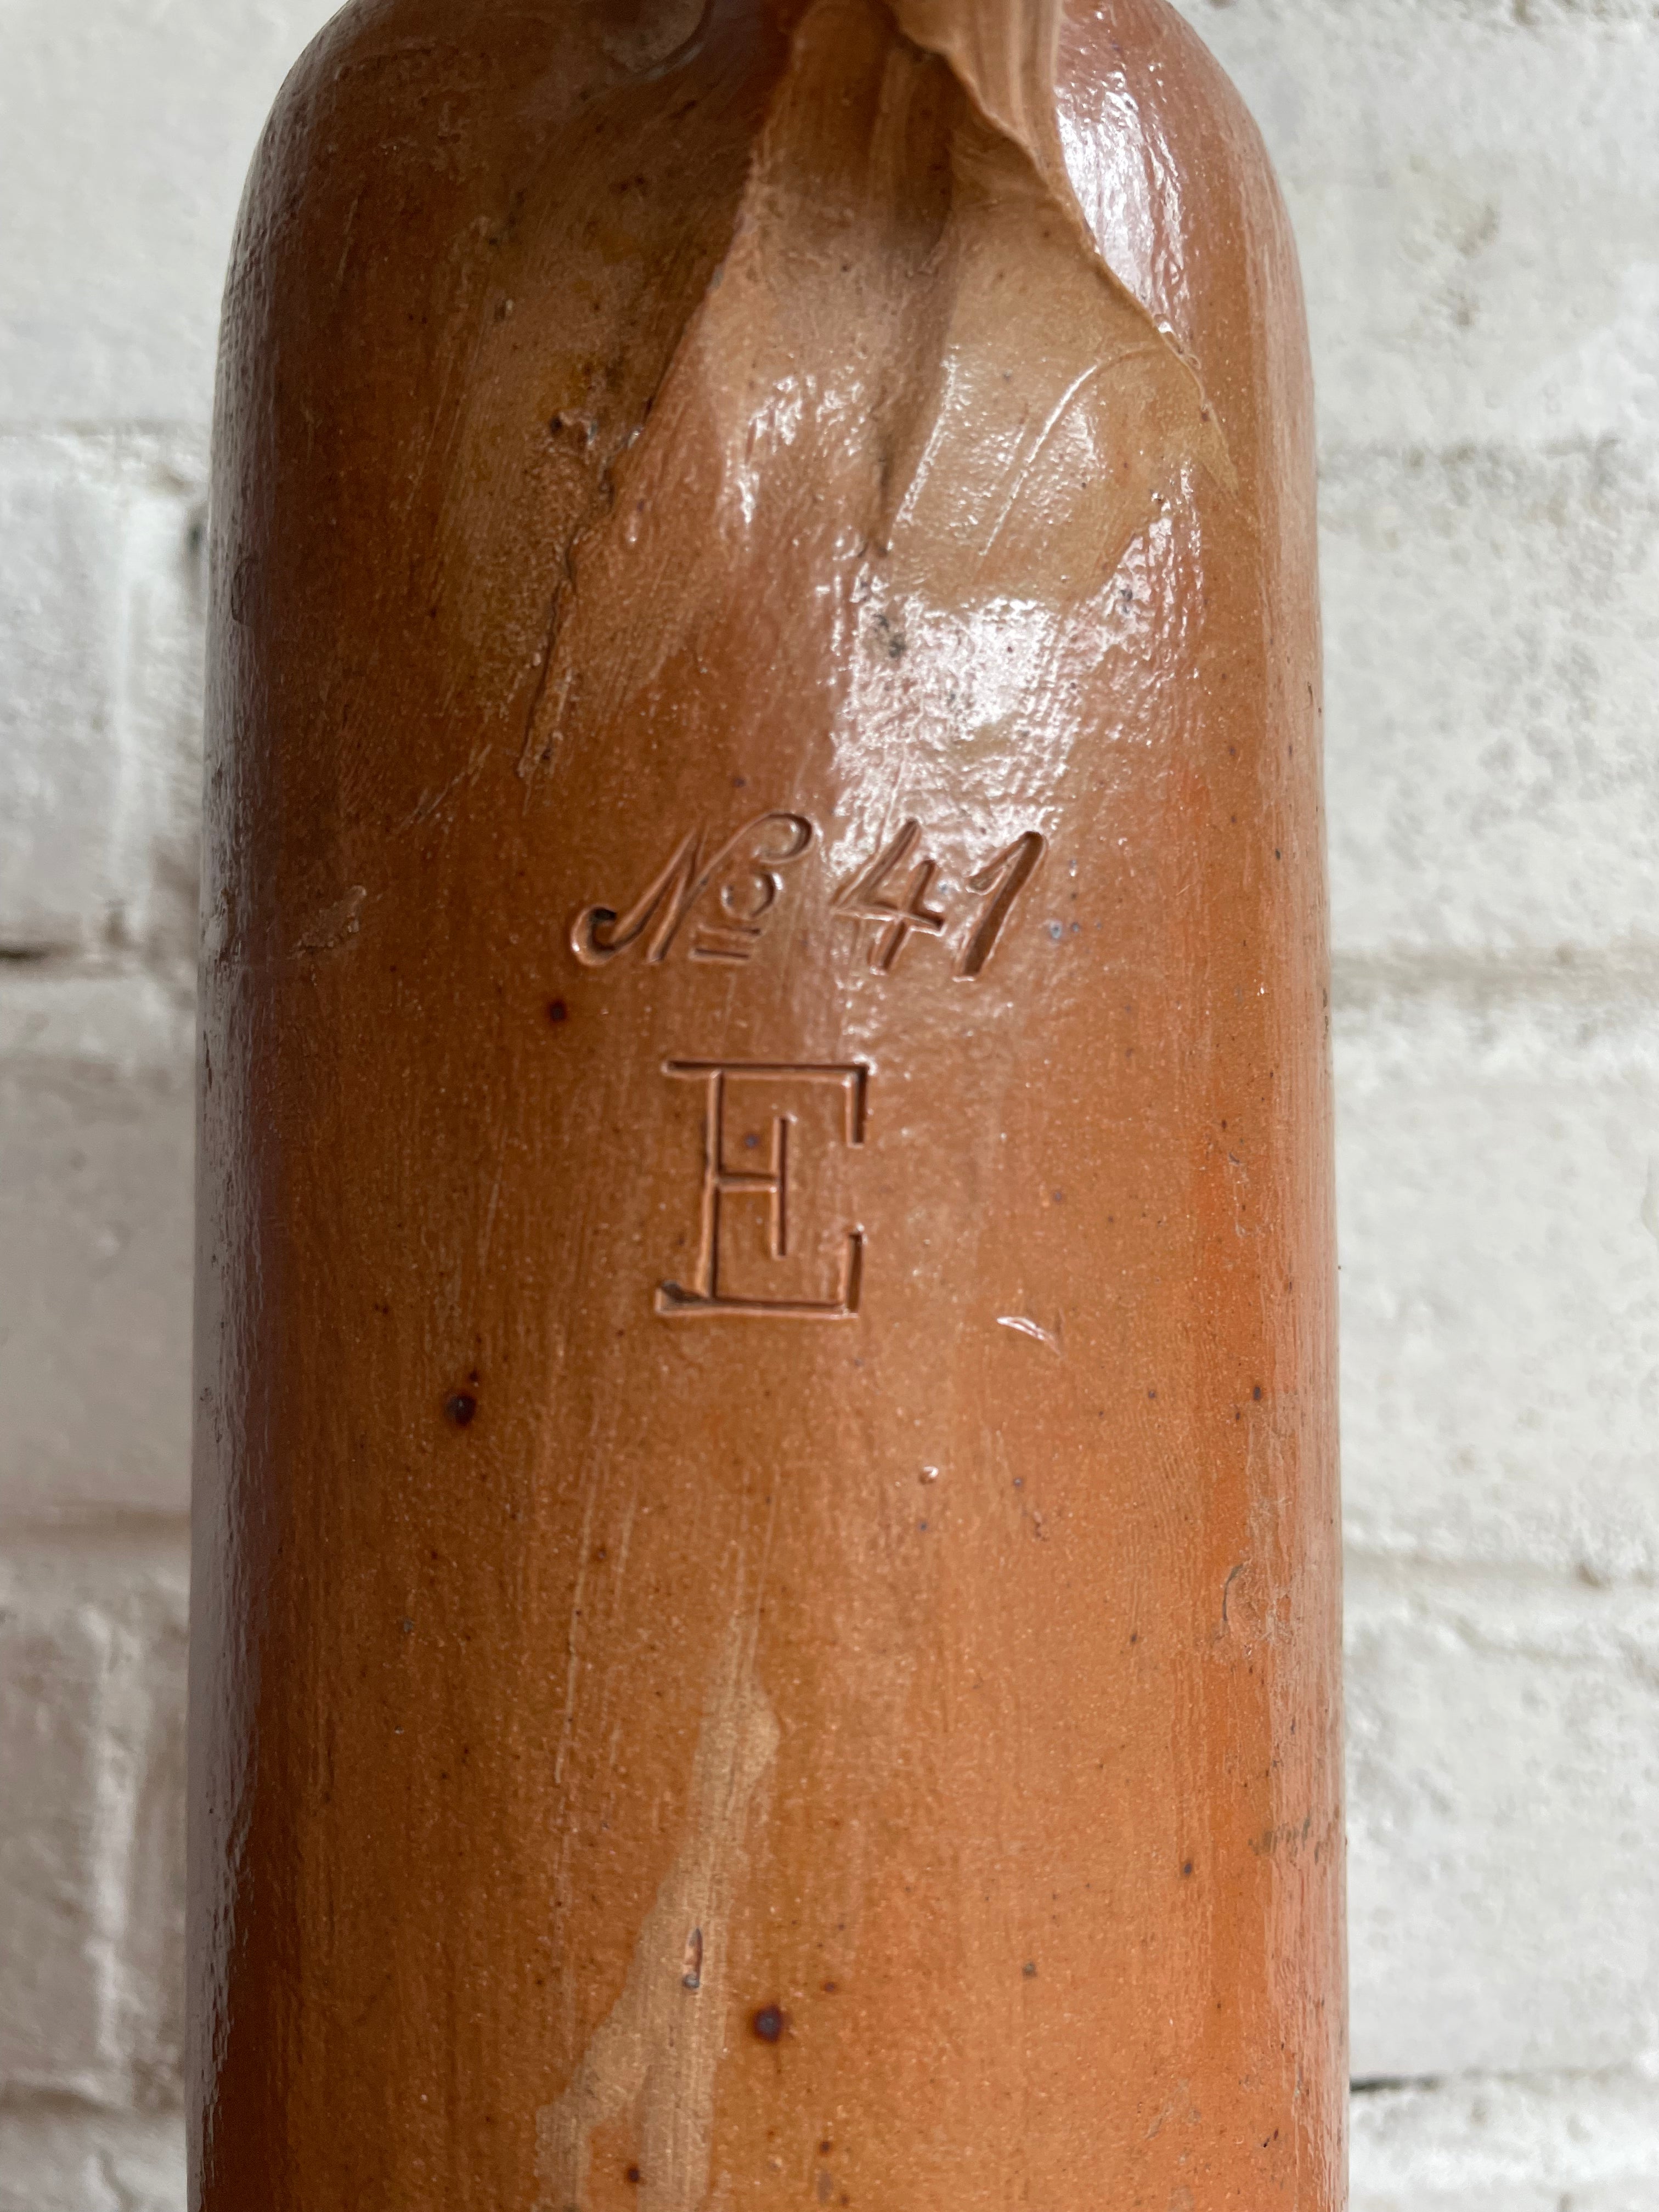 19th Century Ceramic Bottle/Candleholder with Engraved No. 41